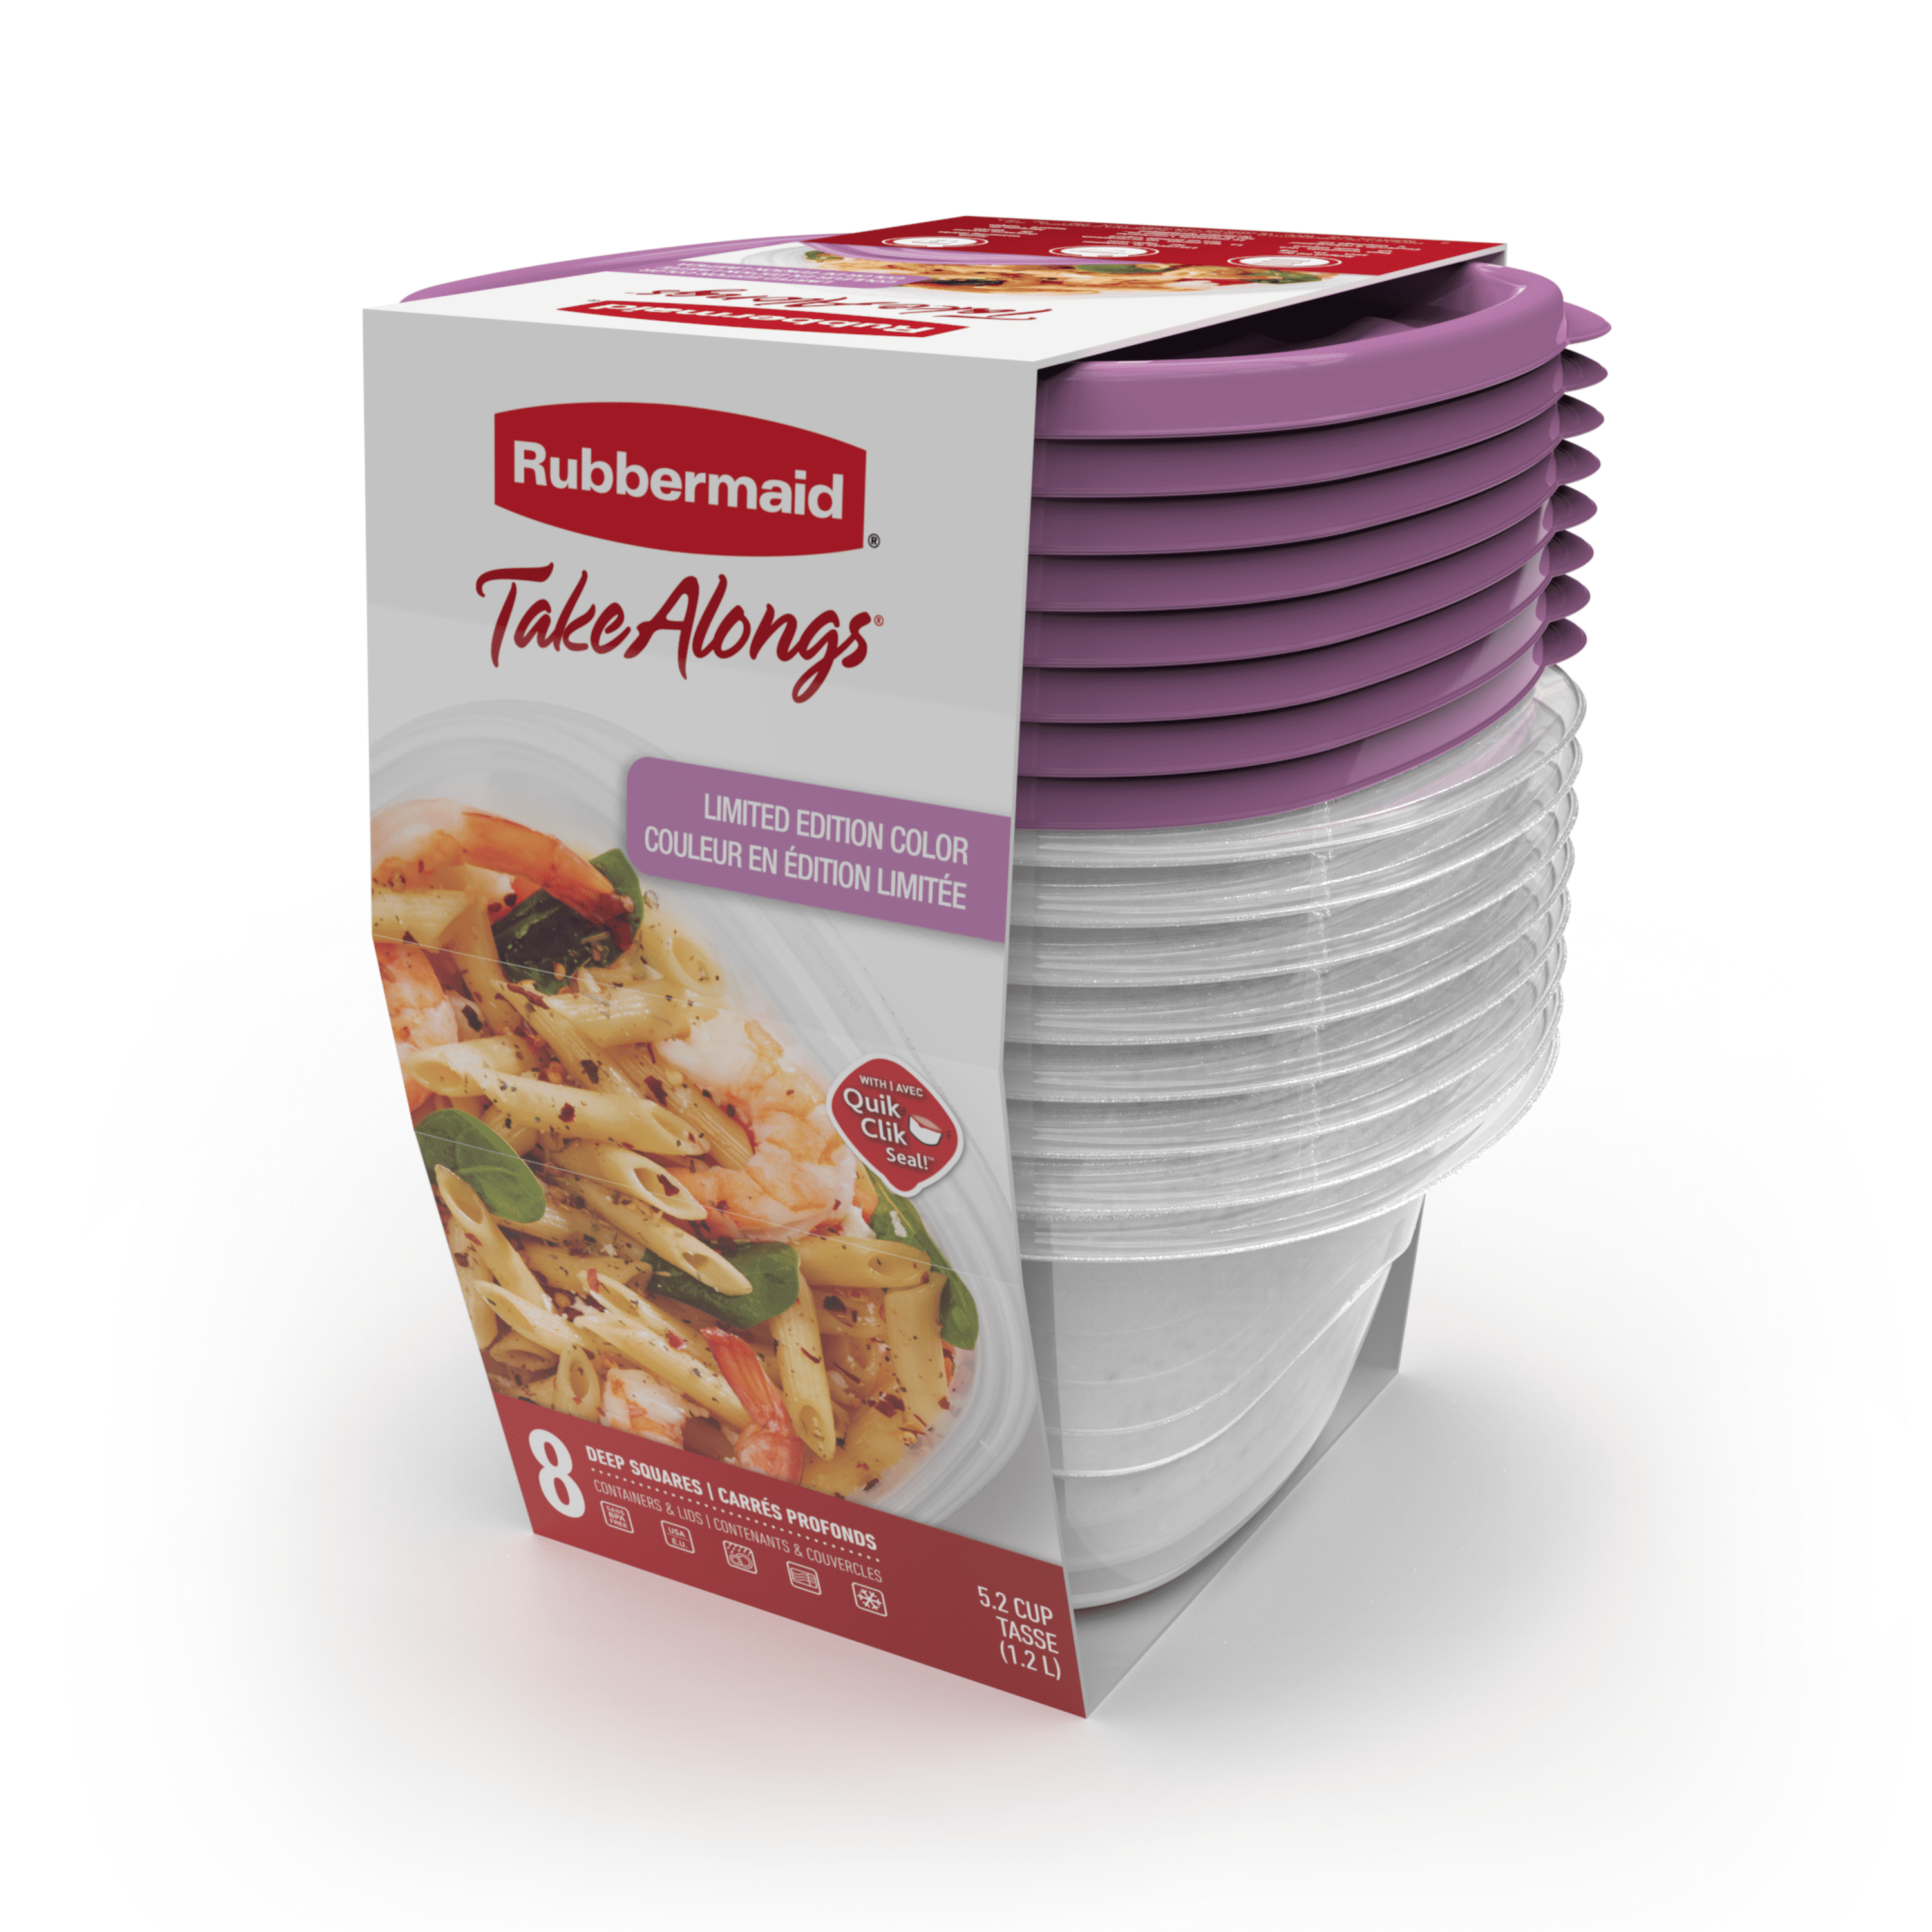 Rubbermaid Take-Along Rectangular Container - 2 Pack - Mulled